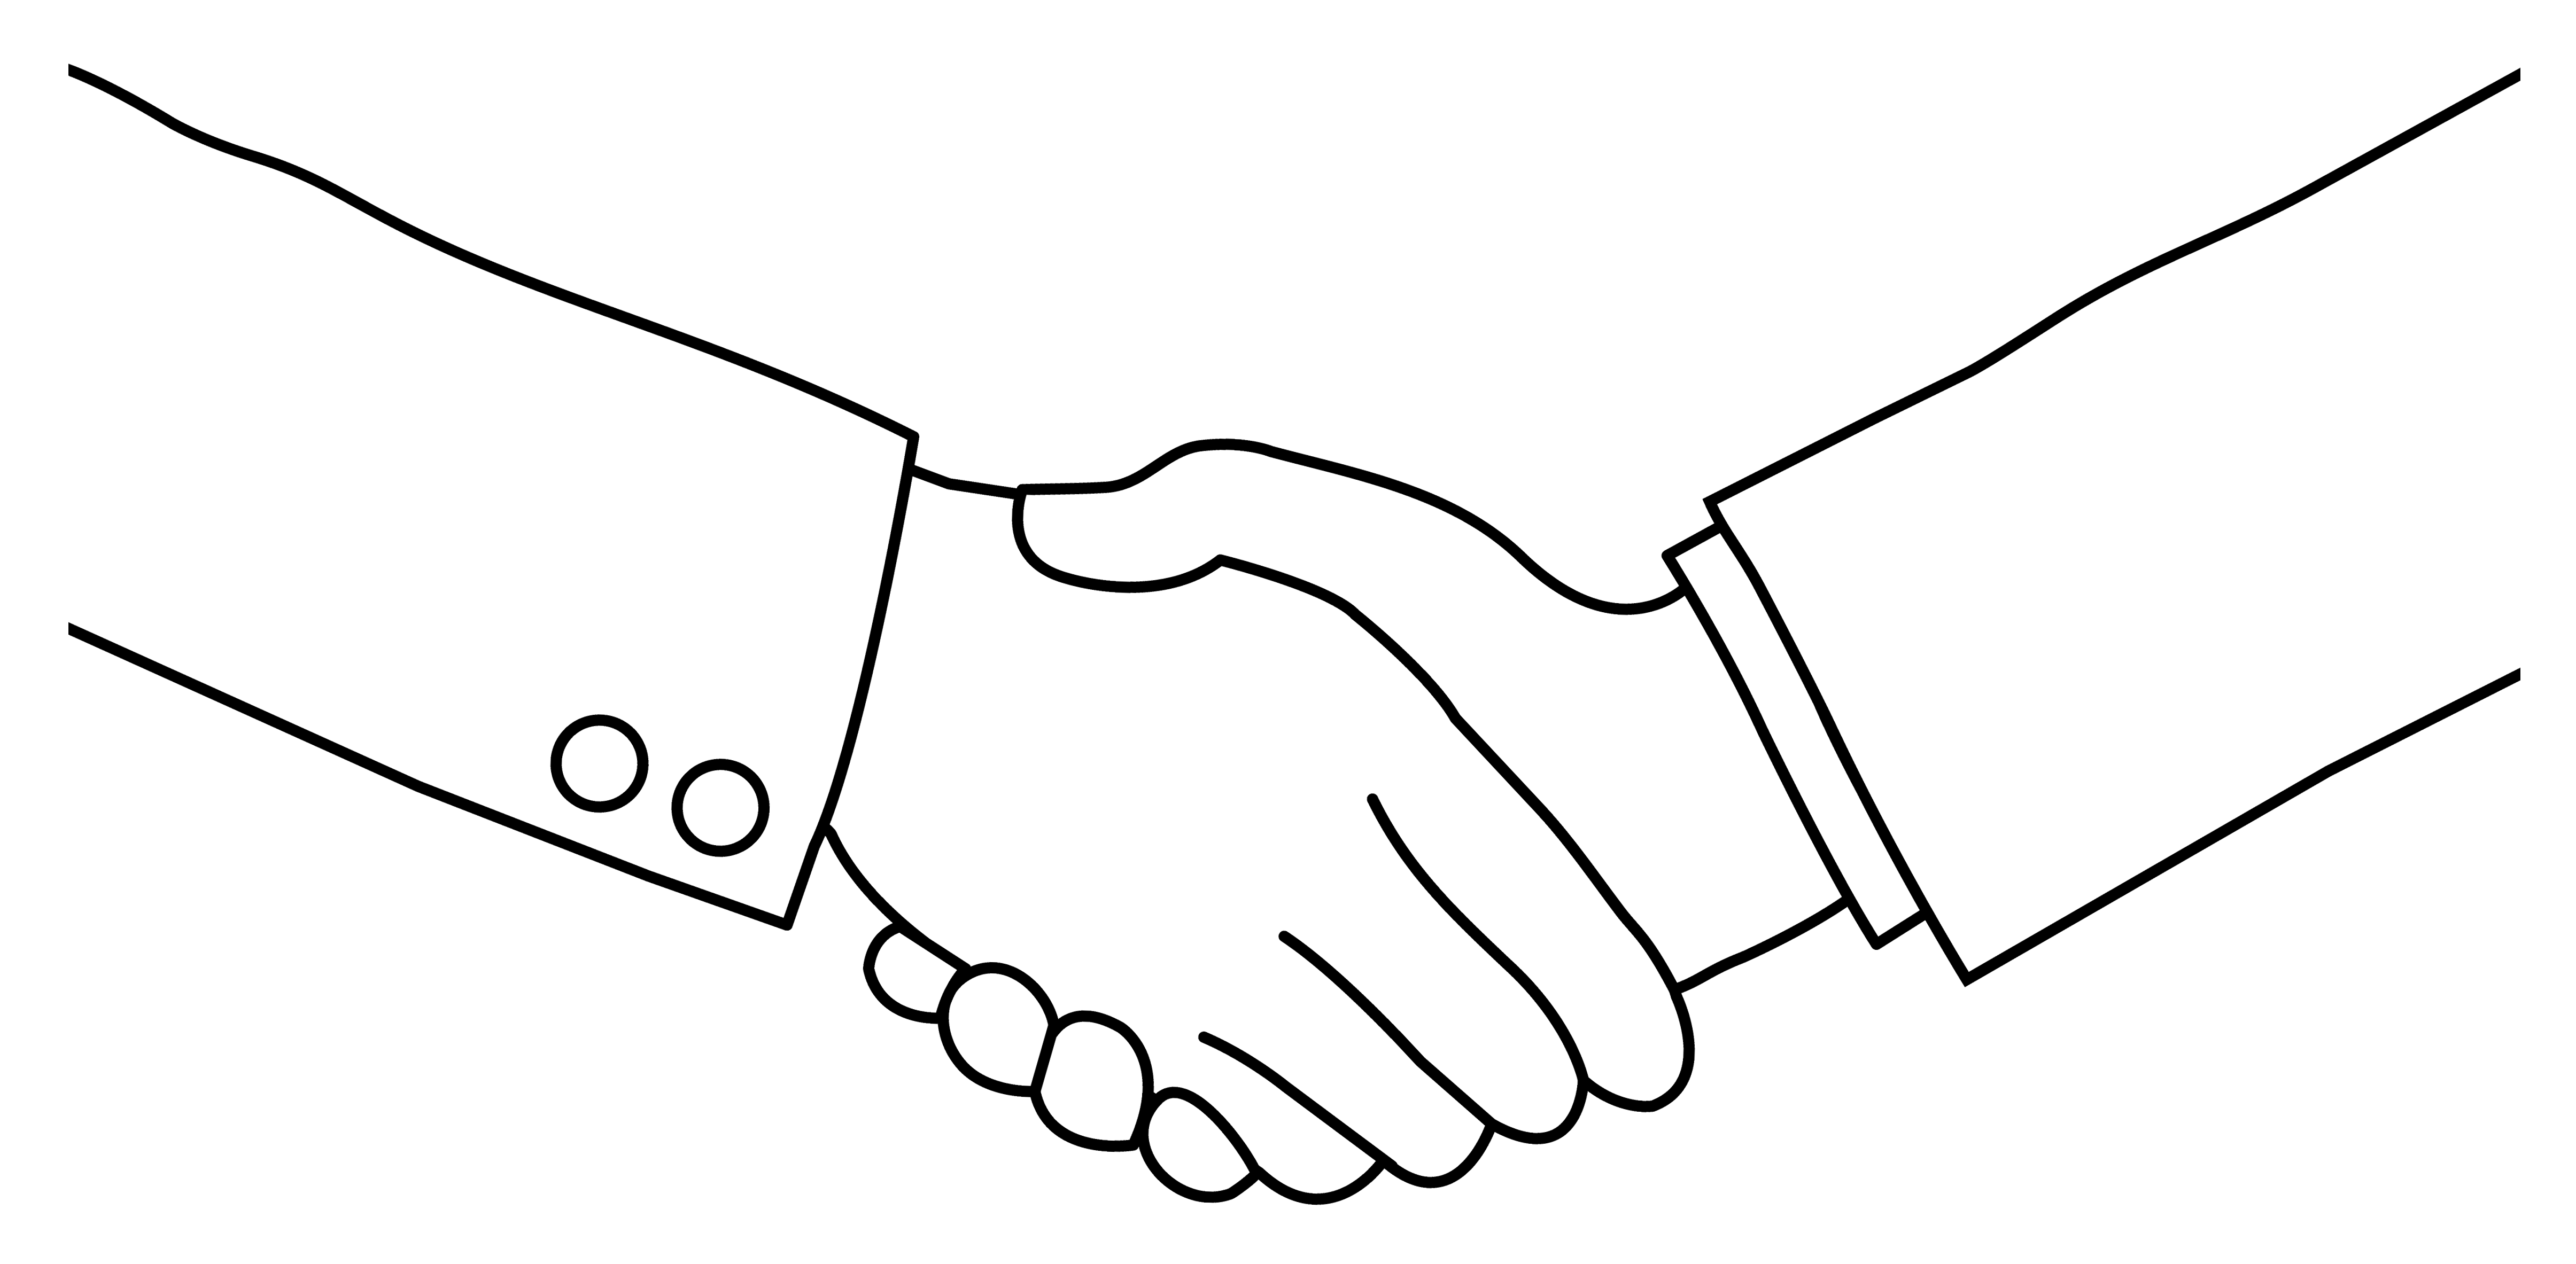 Free Handshaking Cliparts, Download Free Clip Art, Free Clip Art on